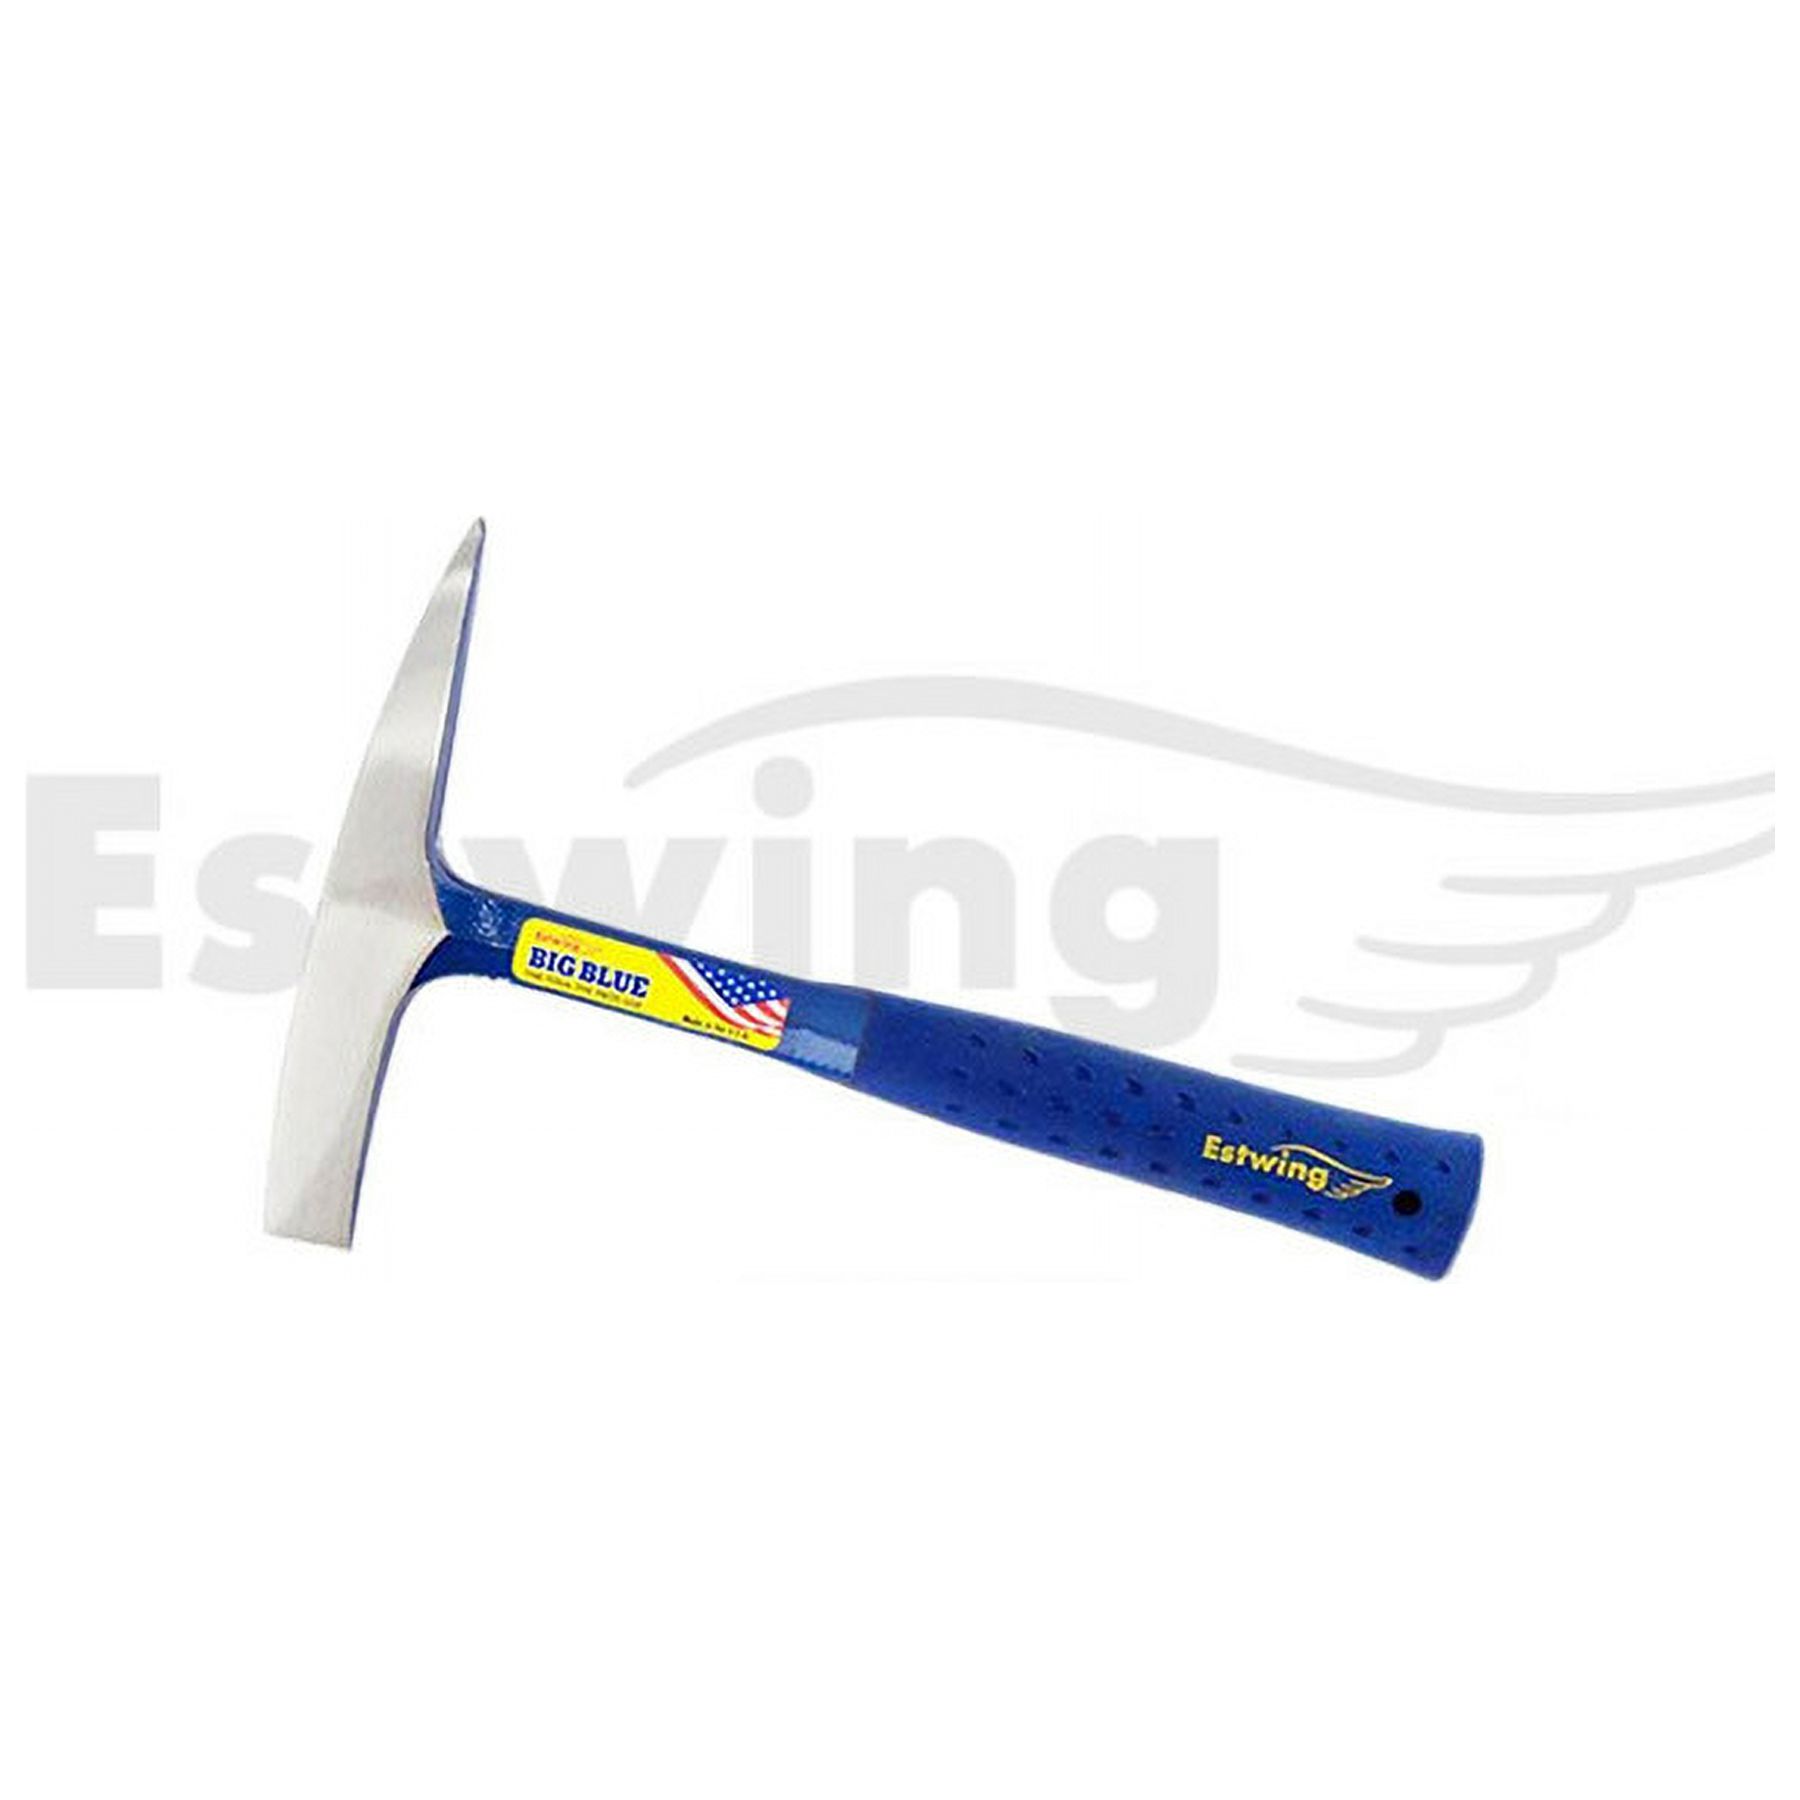 Estwing E3-WC 14 oz BIG BLUE Welding/Chipping Hammer with Shock Reduction Grip - image 2 of 2